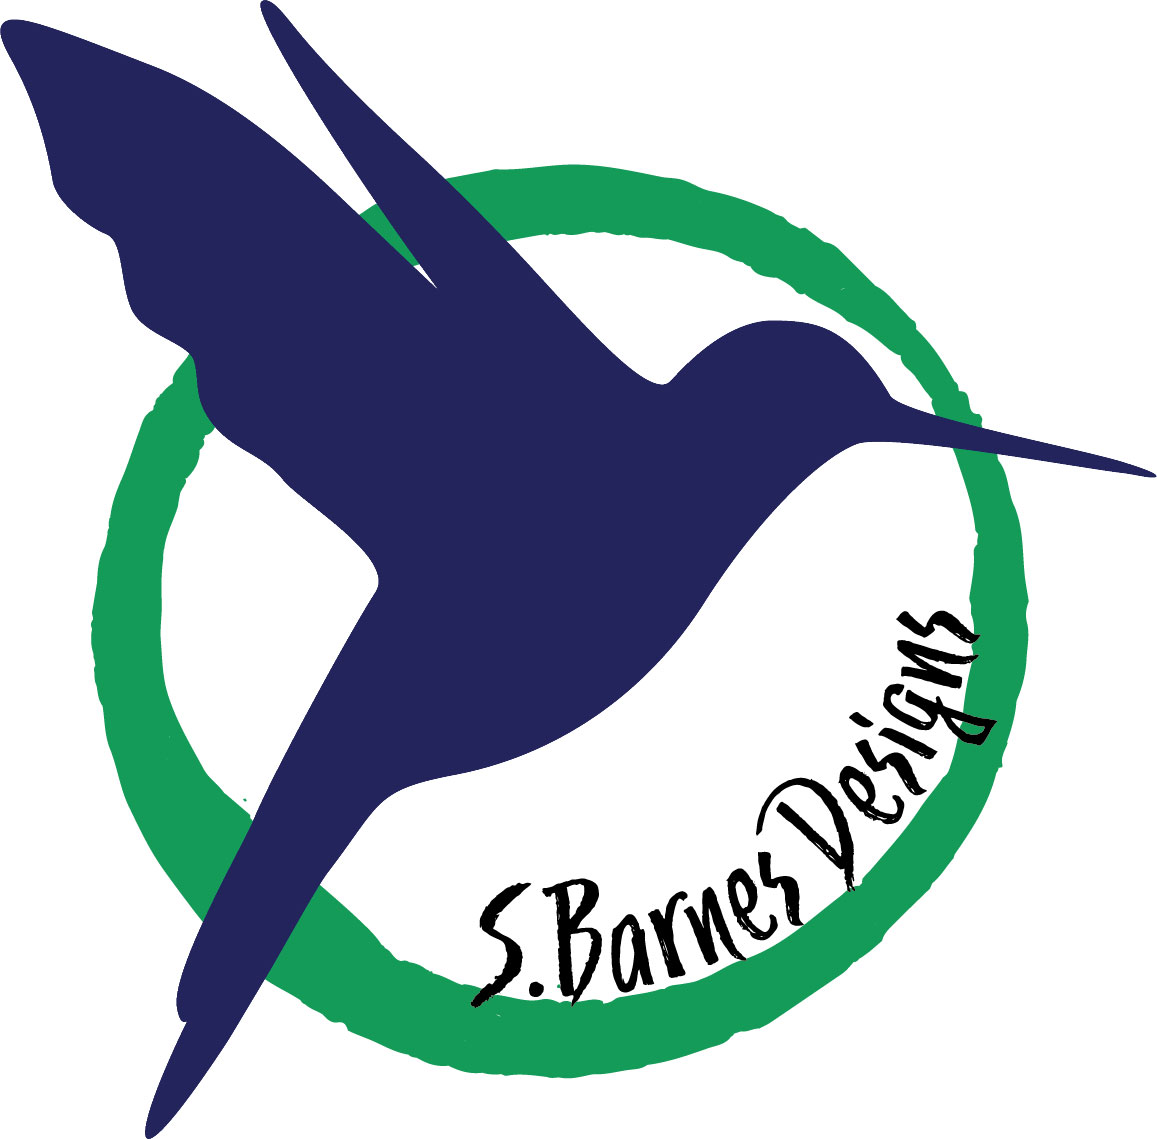 Logo for SBarnes Designs, Blue humming bird and a green imperfect circle behind it.